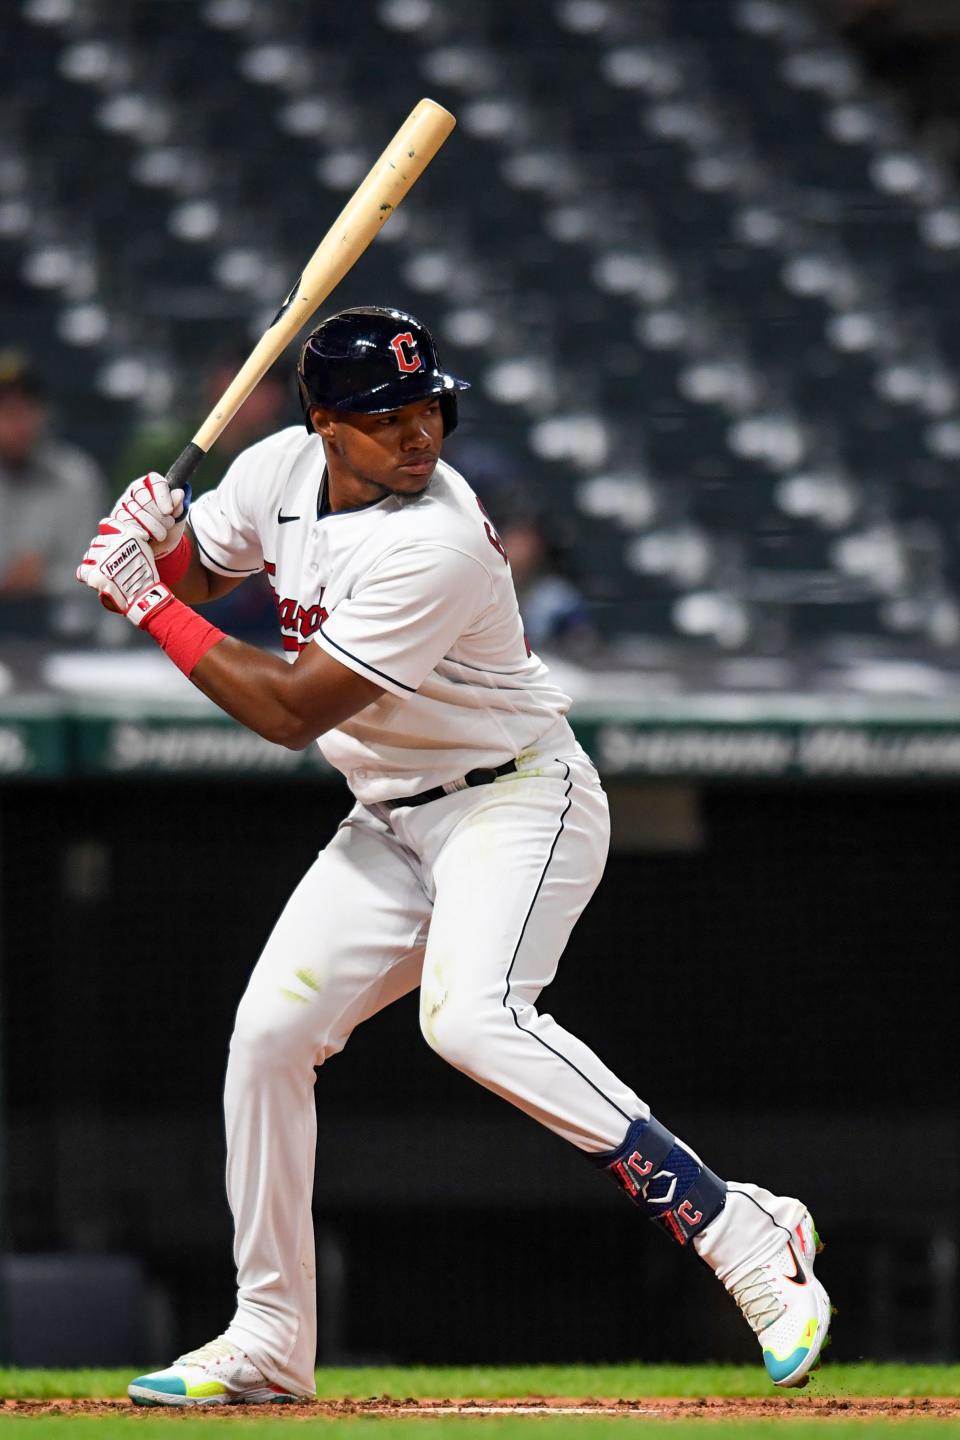 Guardians rookie outfielder Oscar Gonzalez has followed some simple rules and was hitting over .400 after Thursday night's win over the Oakland Athletics at Progressive Field. [Nick Cammett/Associated Press]